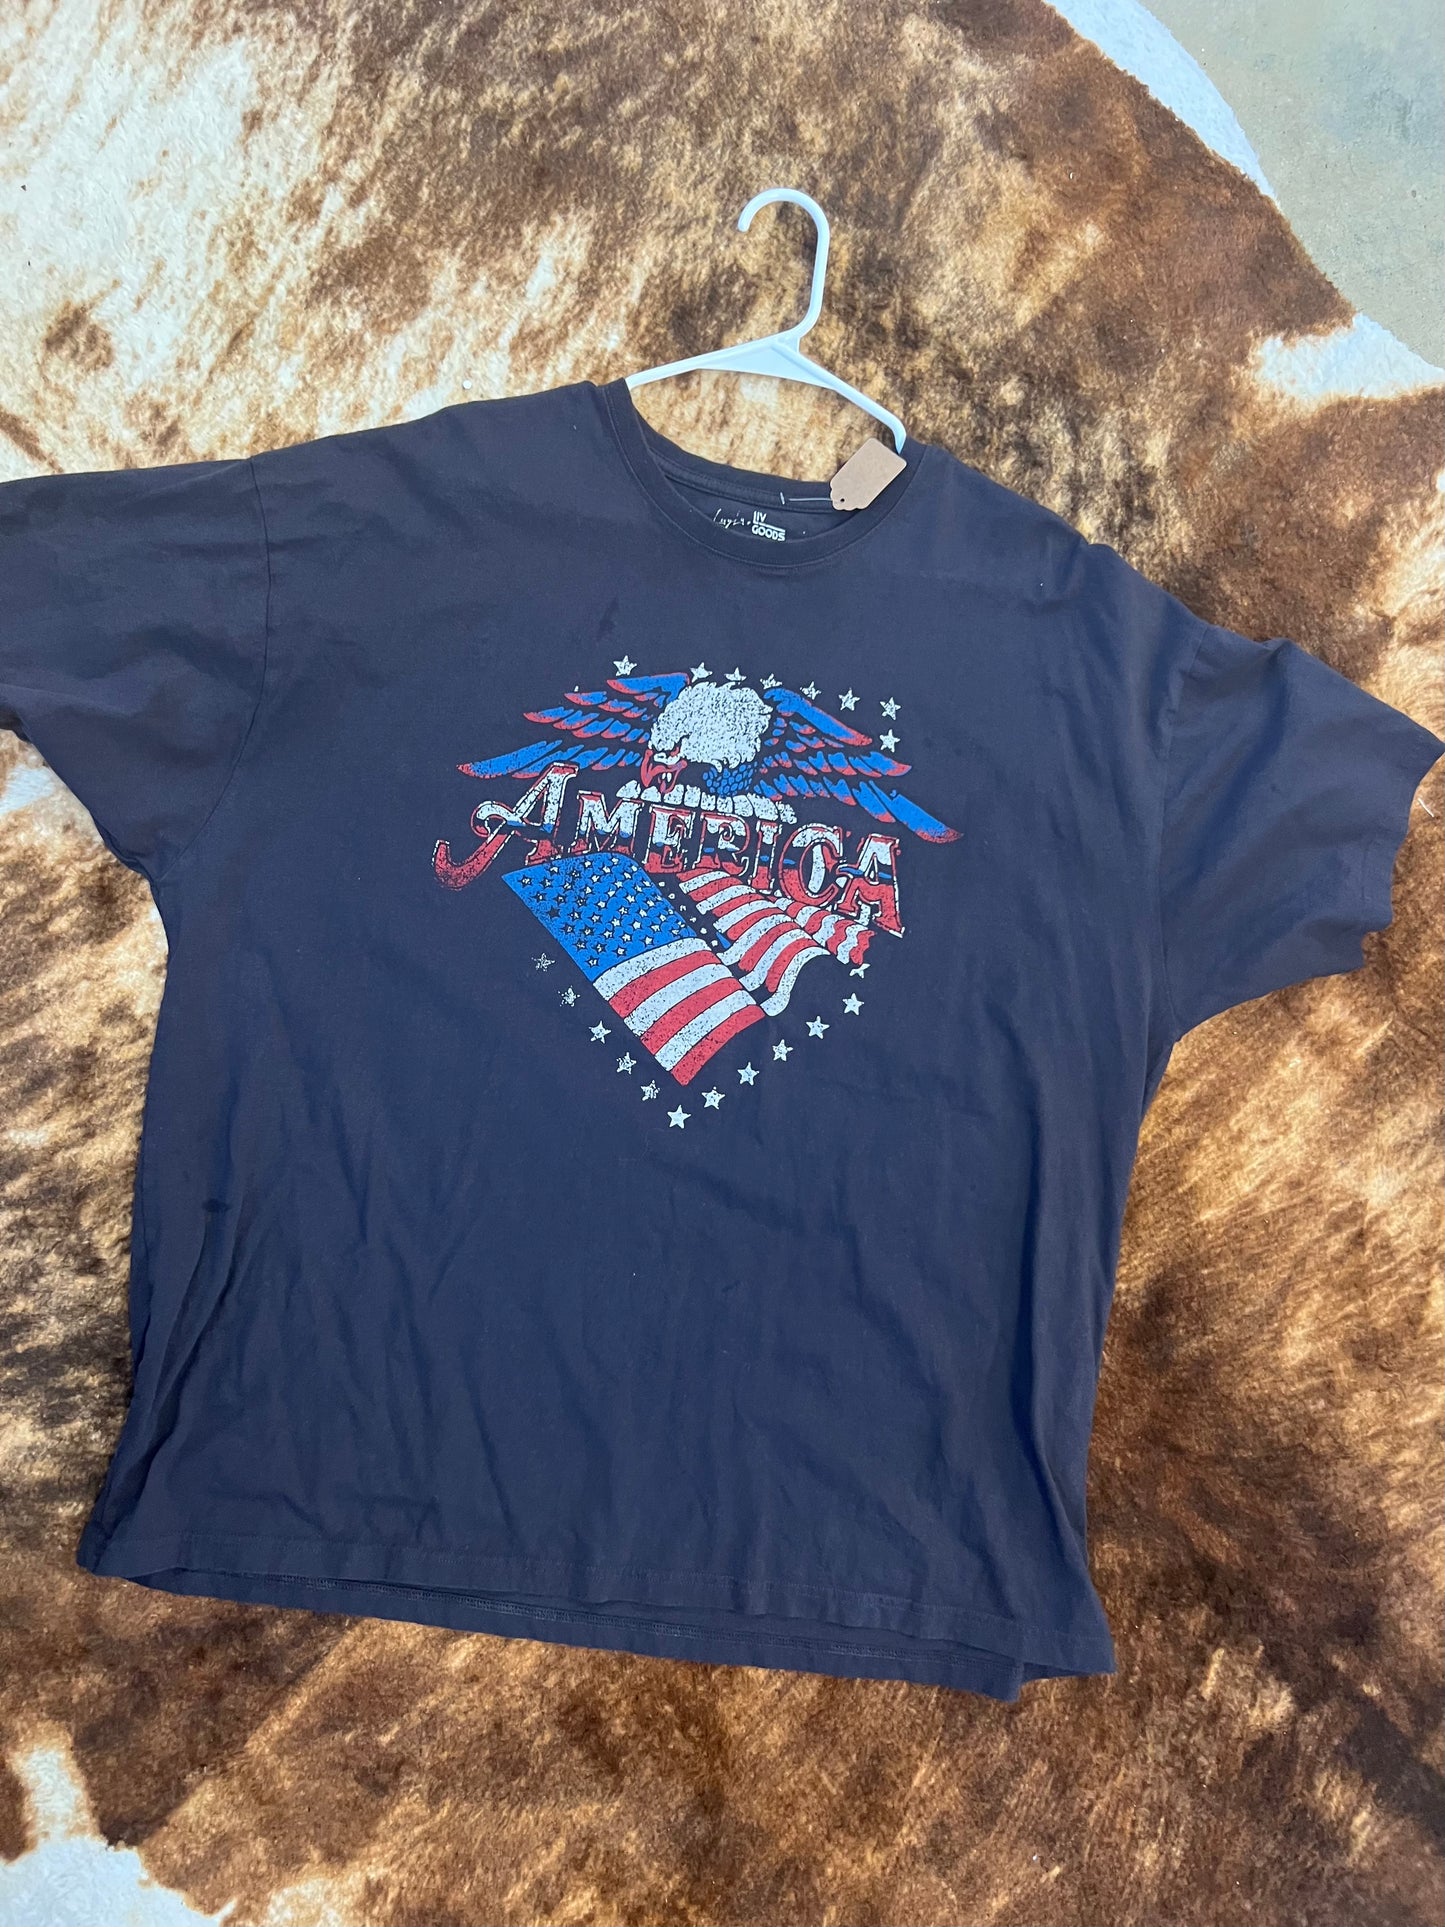 One size American tee